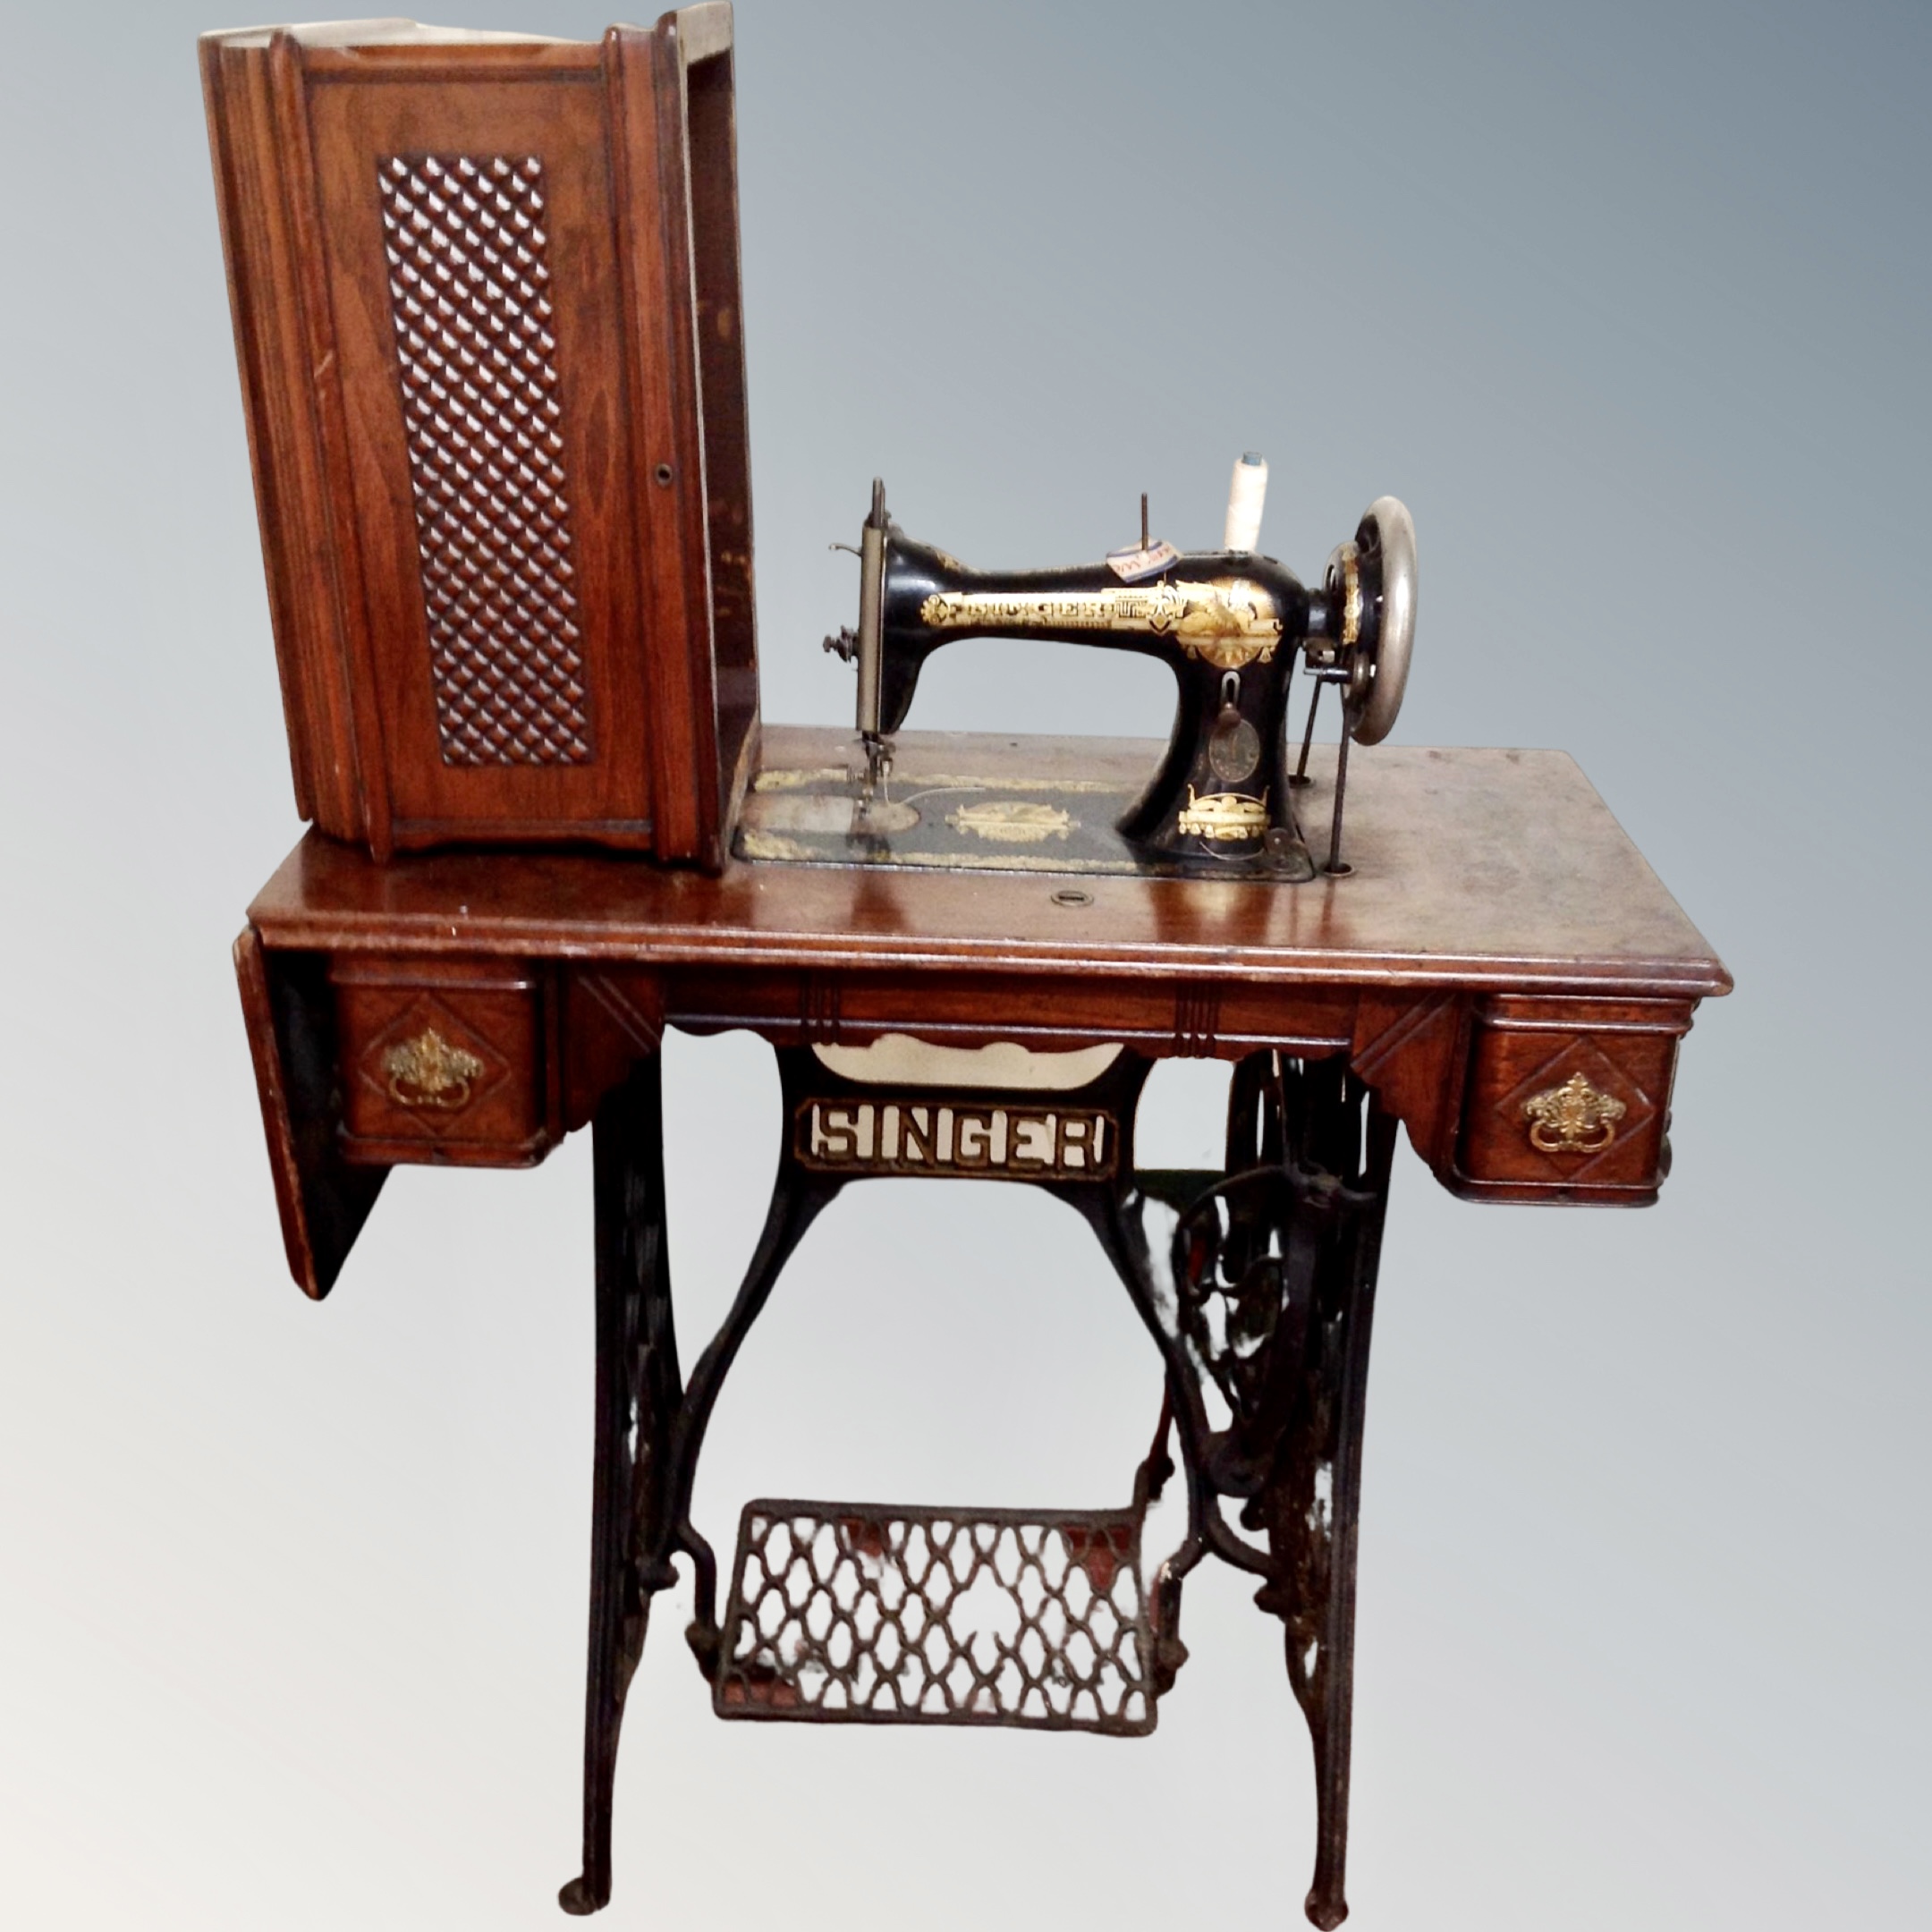 A Victorian Singer treadle sewing machine